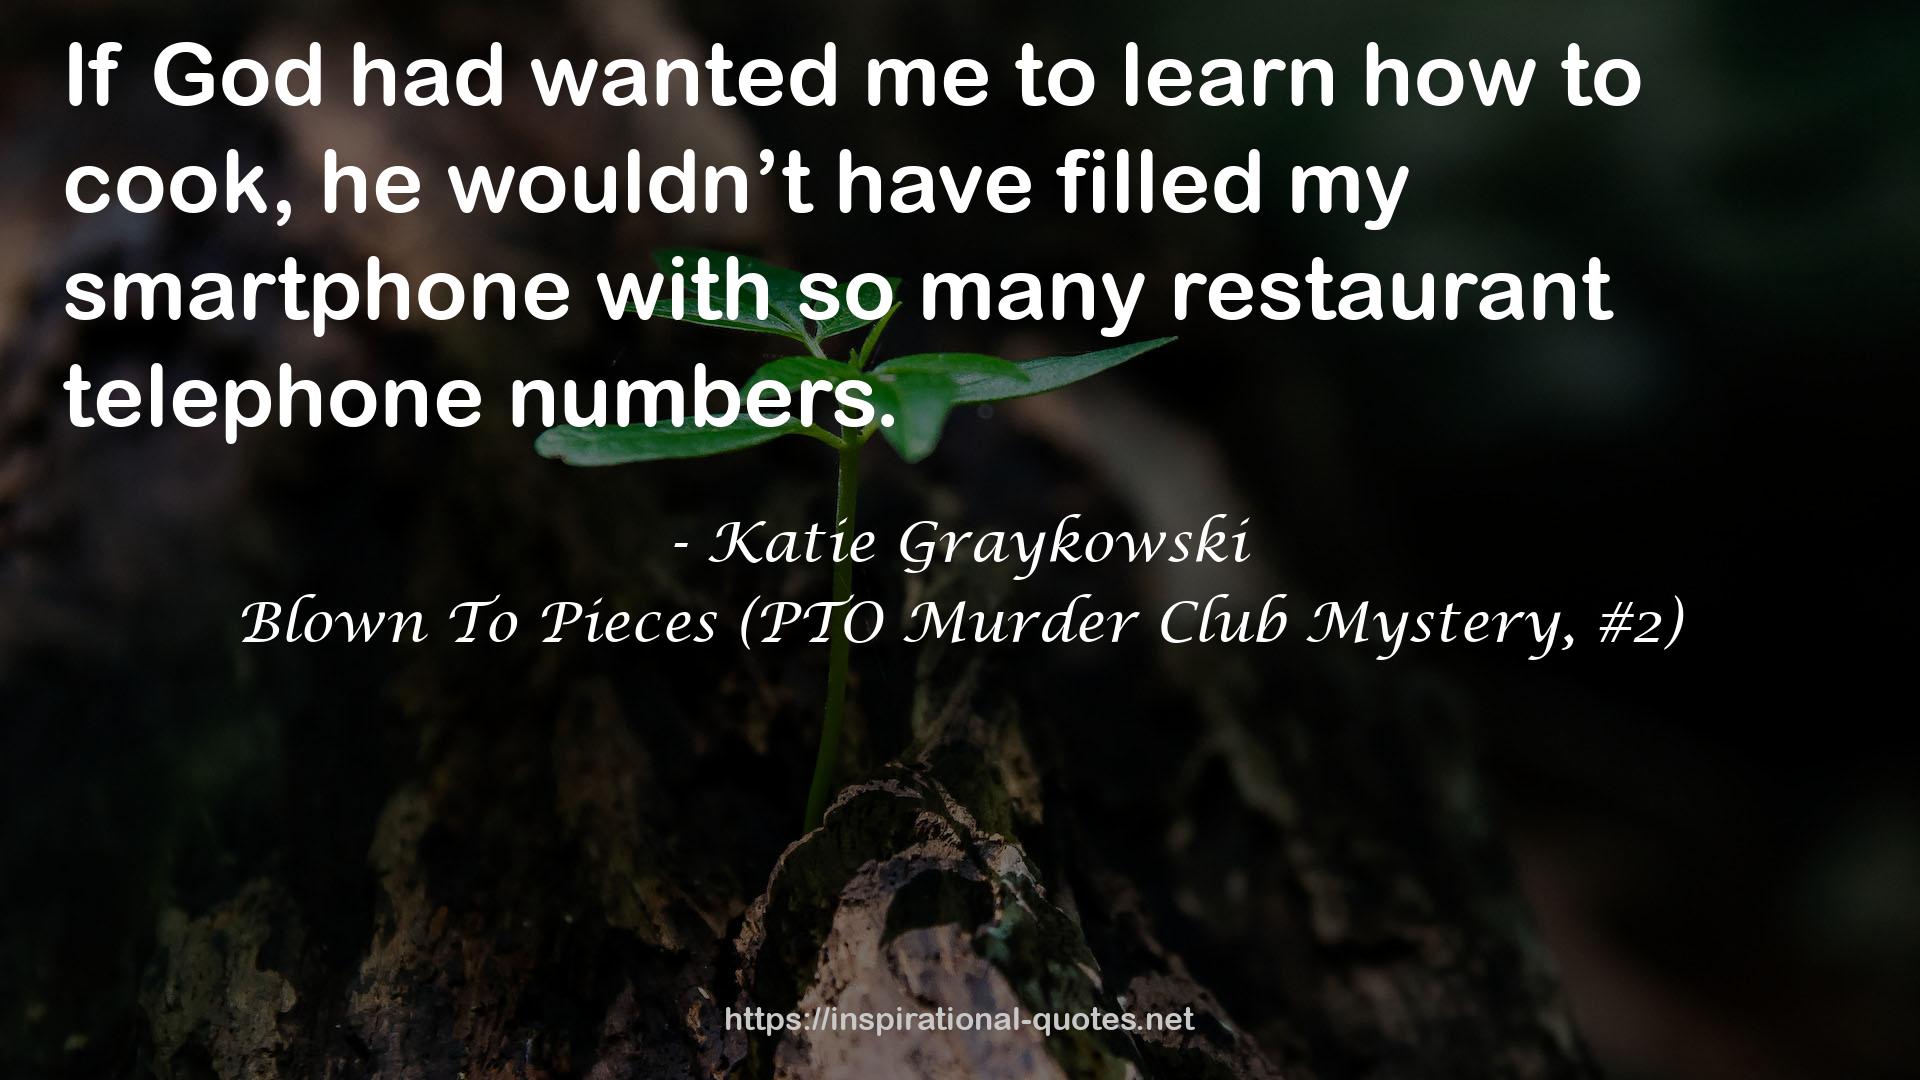 Blown To Pieces (PTO Murder Club Mystery, #2) QUOTES